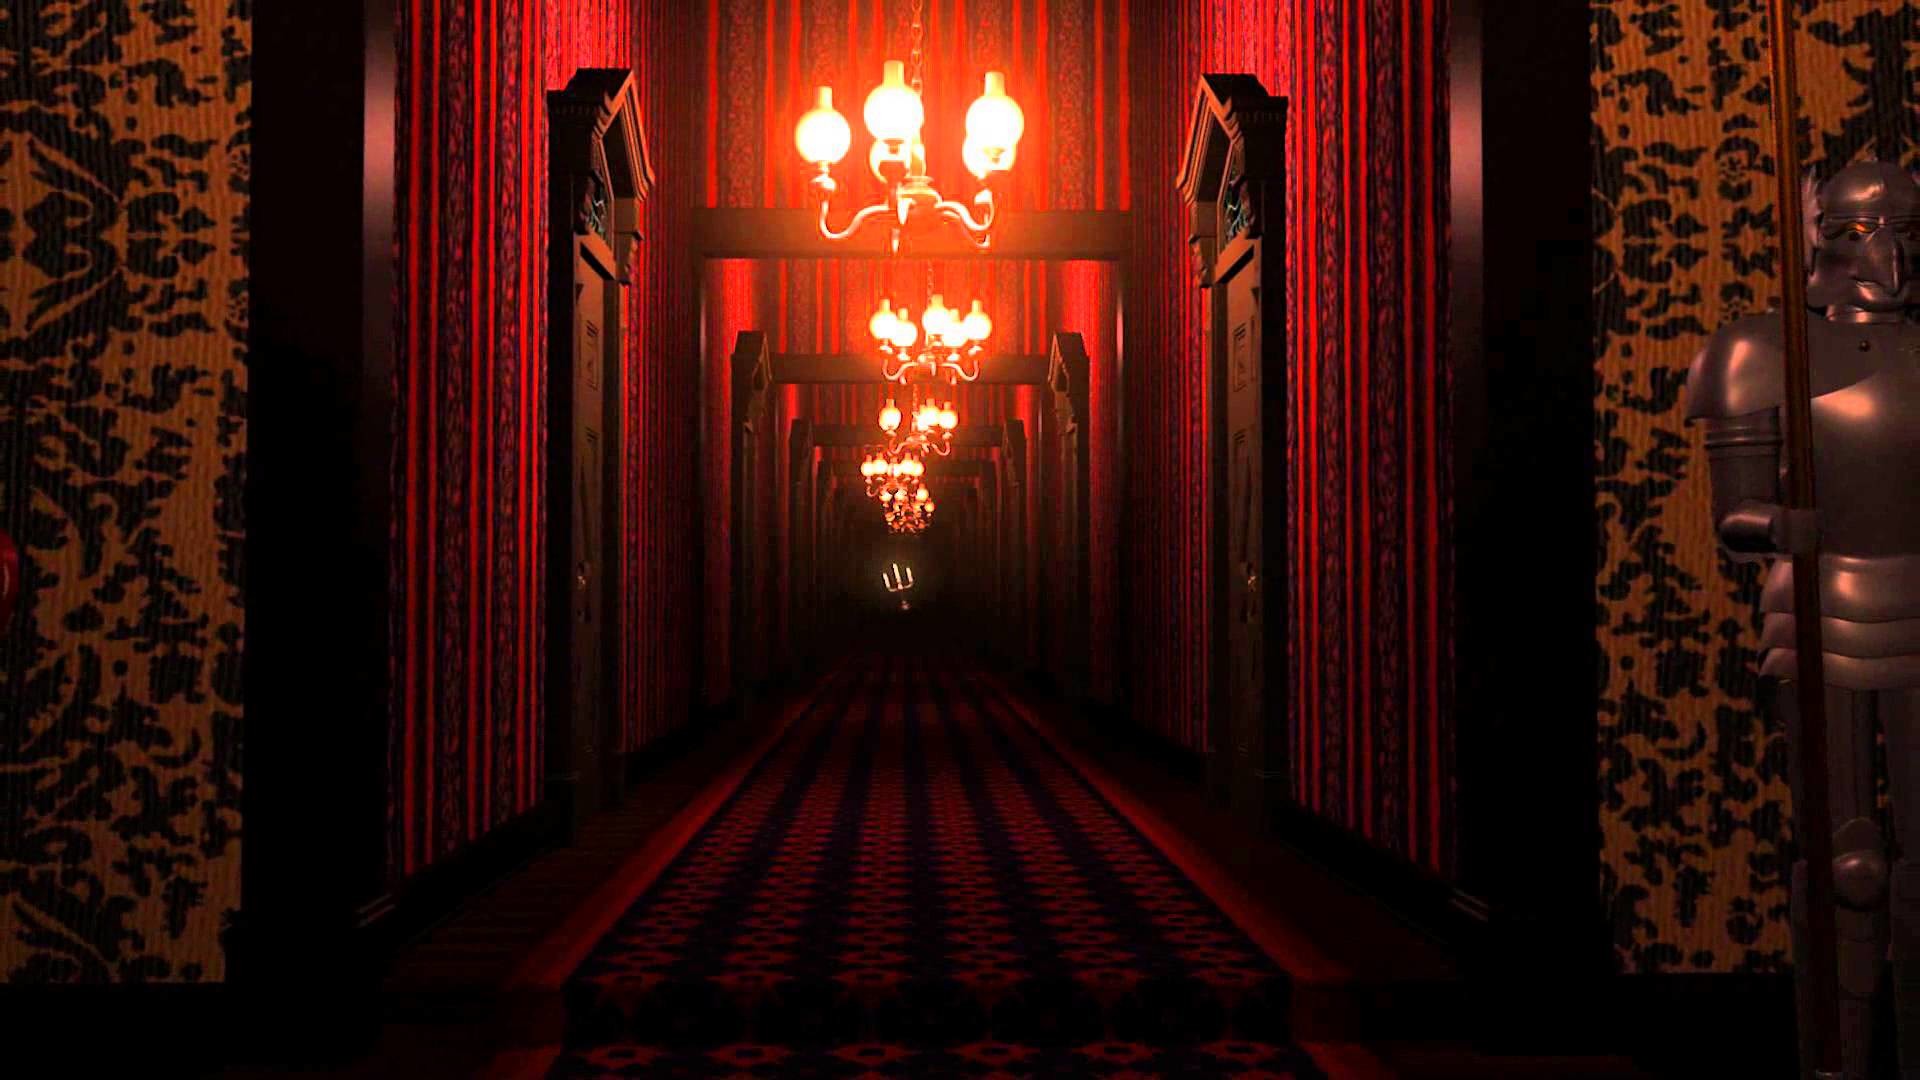 1920x1080 A short preview of the Endless Hallway sequence from my Digital recreation  of the Haunted Mansion